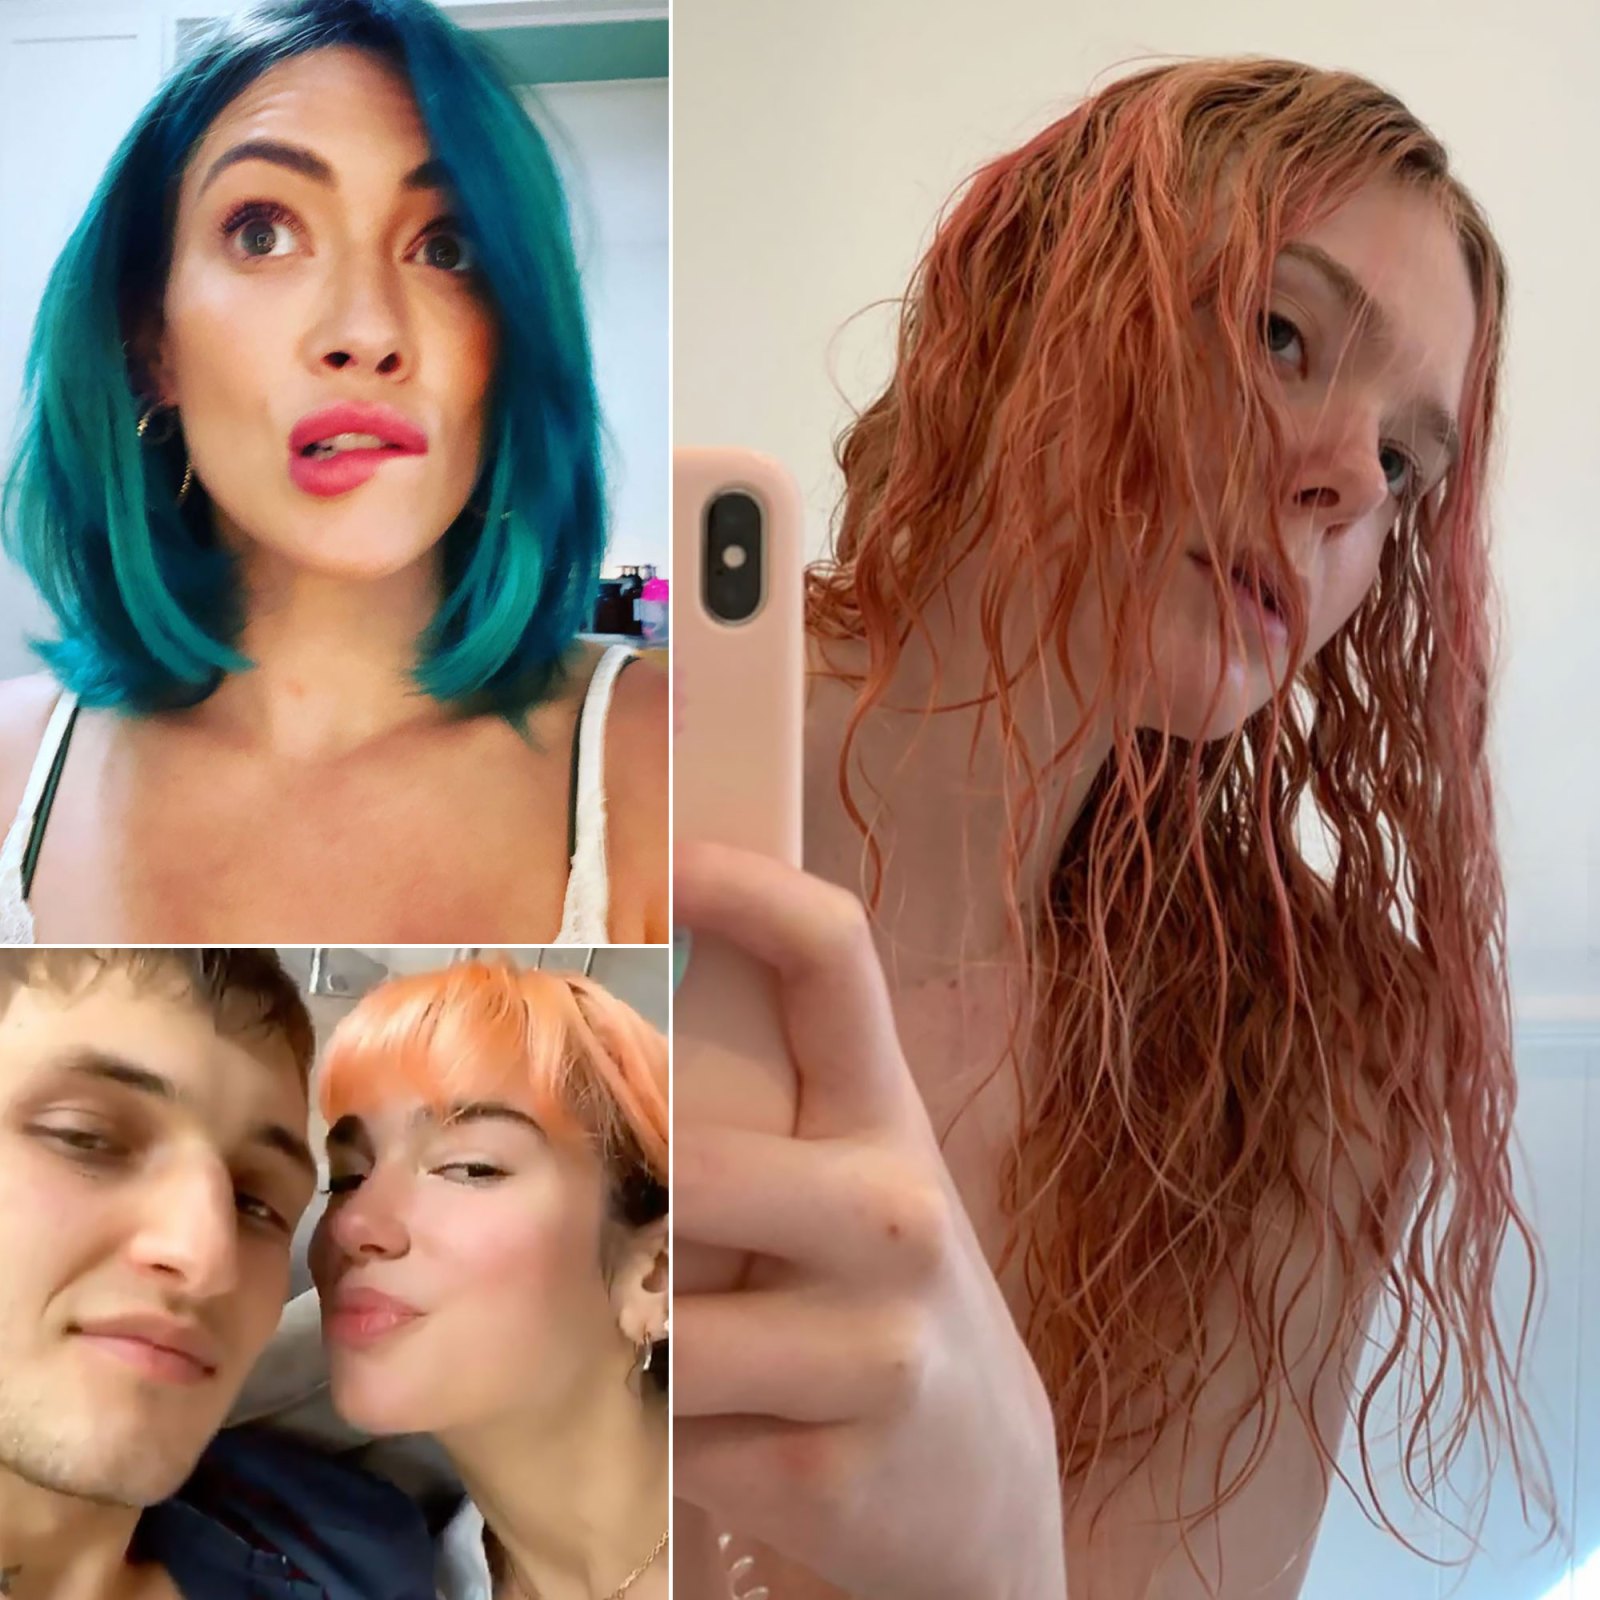 Celebrities Trying Out Bold New Hair Colors While Stuck At Home in Quarantine